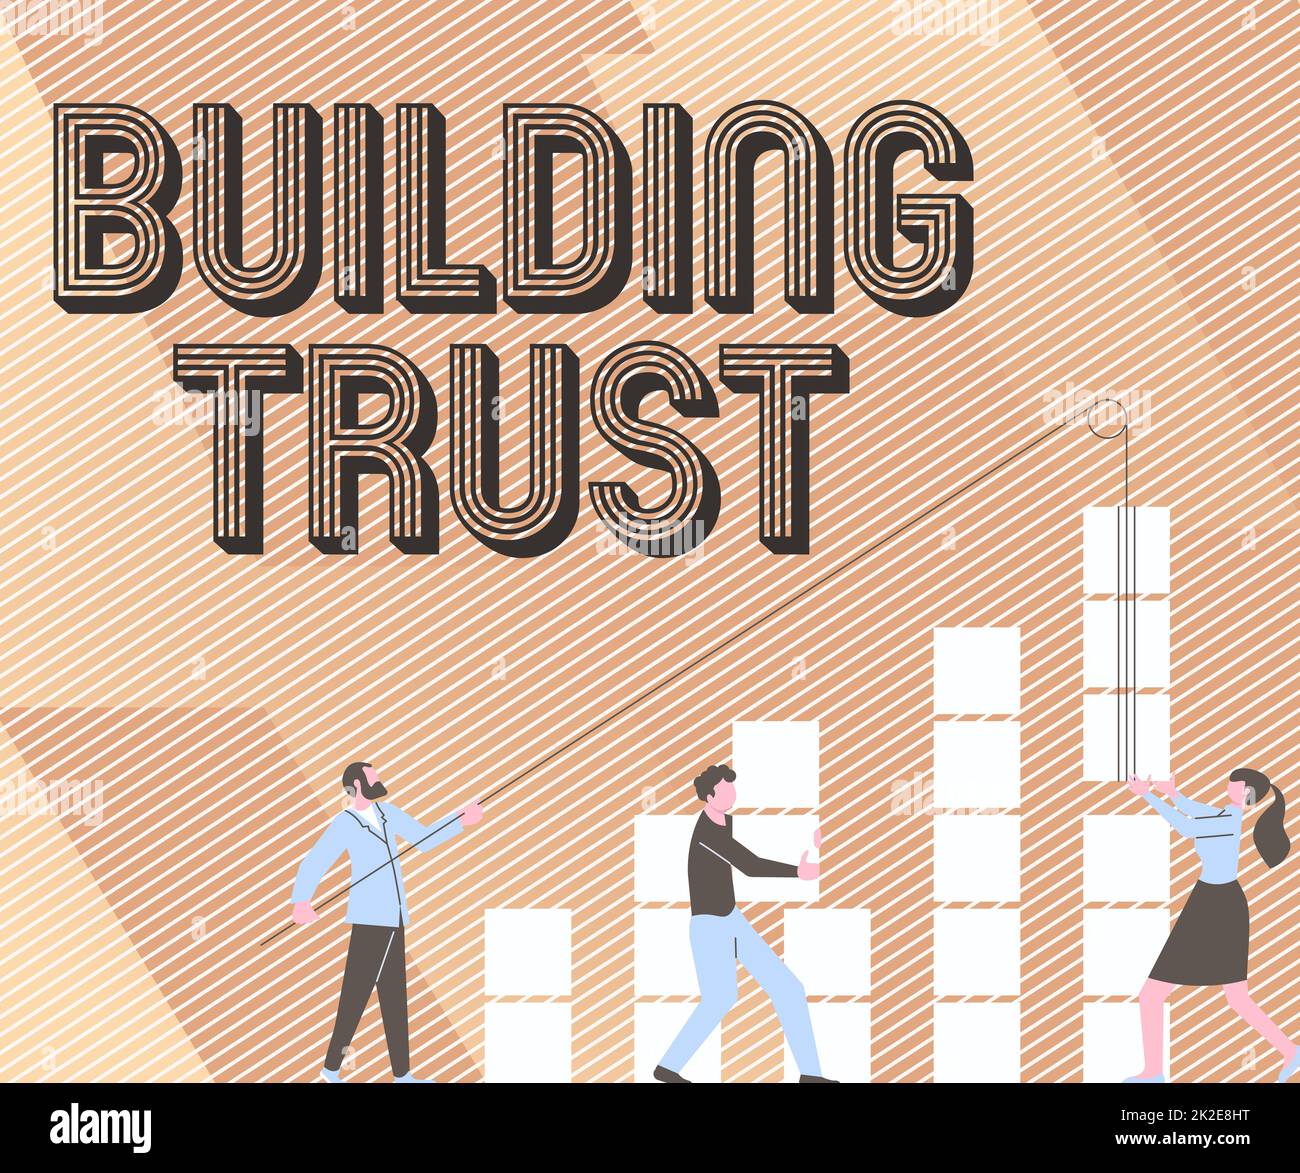 Text caption presenting Building Trust. Business concept activity of emerging trust between showing to work effectively Illustration Of Partners Building New Wonderful Ideas For Skills Improvement. Stock Photo